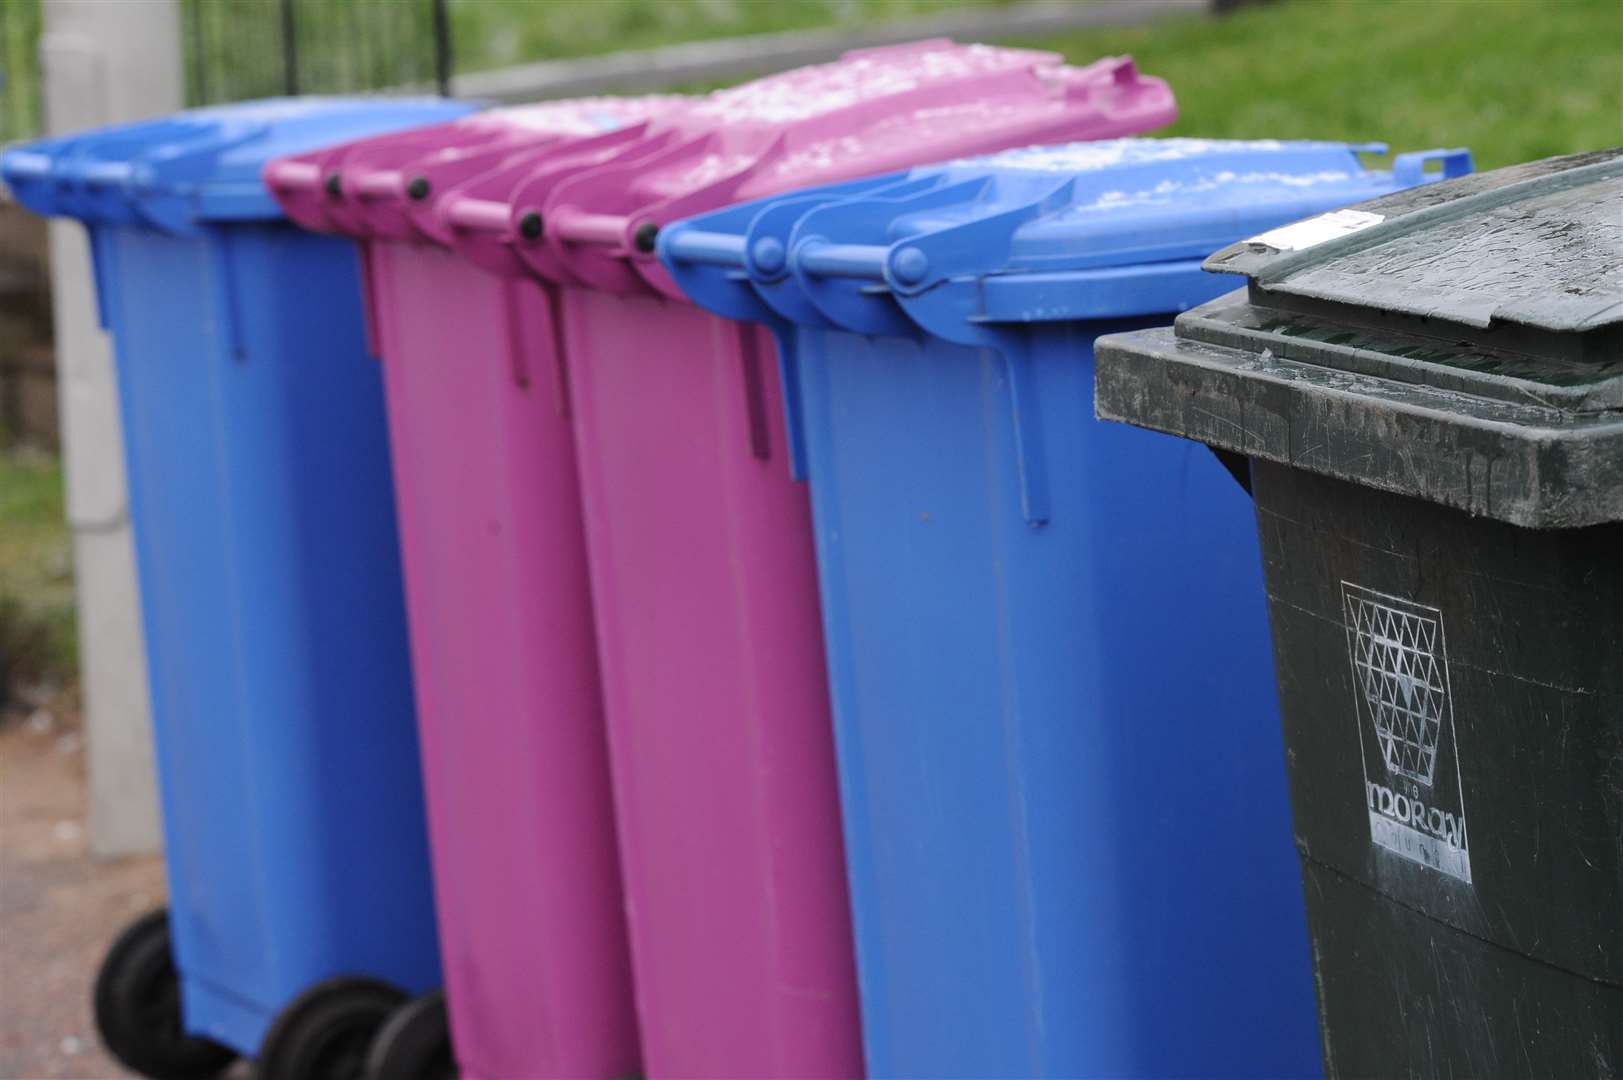 Revised waste bin collection times for the festive season have been released.